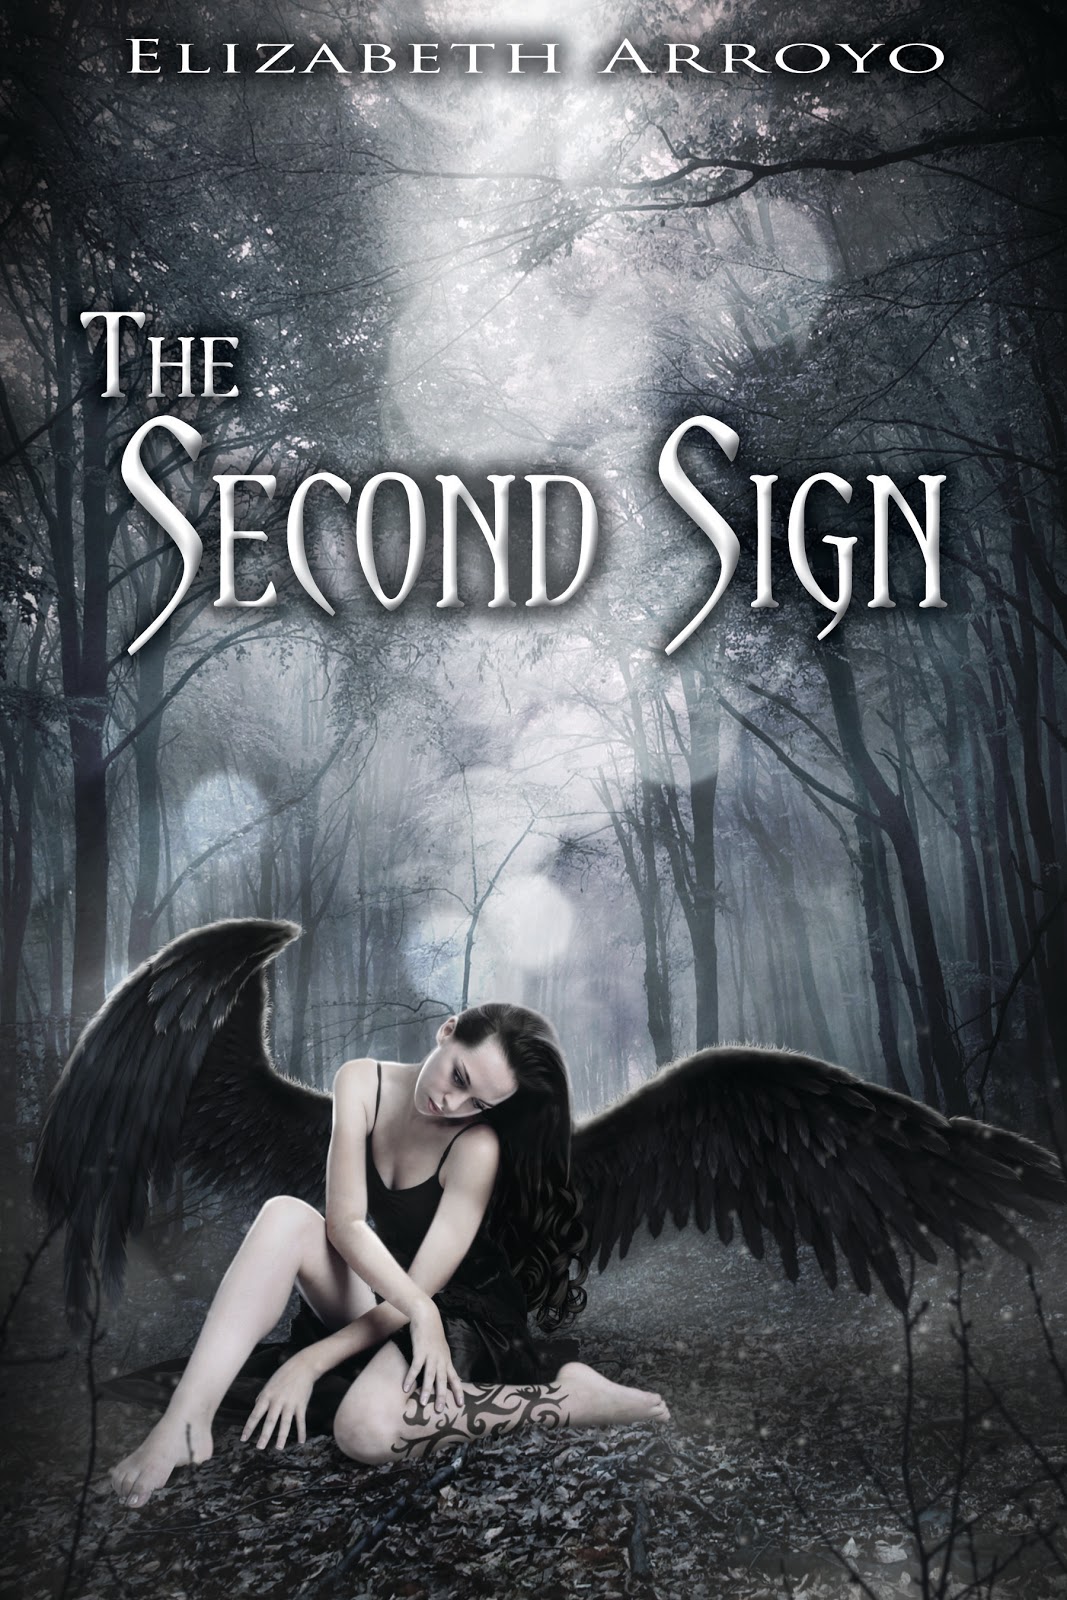 http://www.whatsbeyondforks.com/2013/03/the-second-sign-tour-review-giveaway-of.html